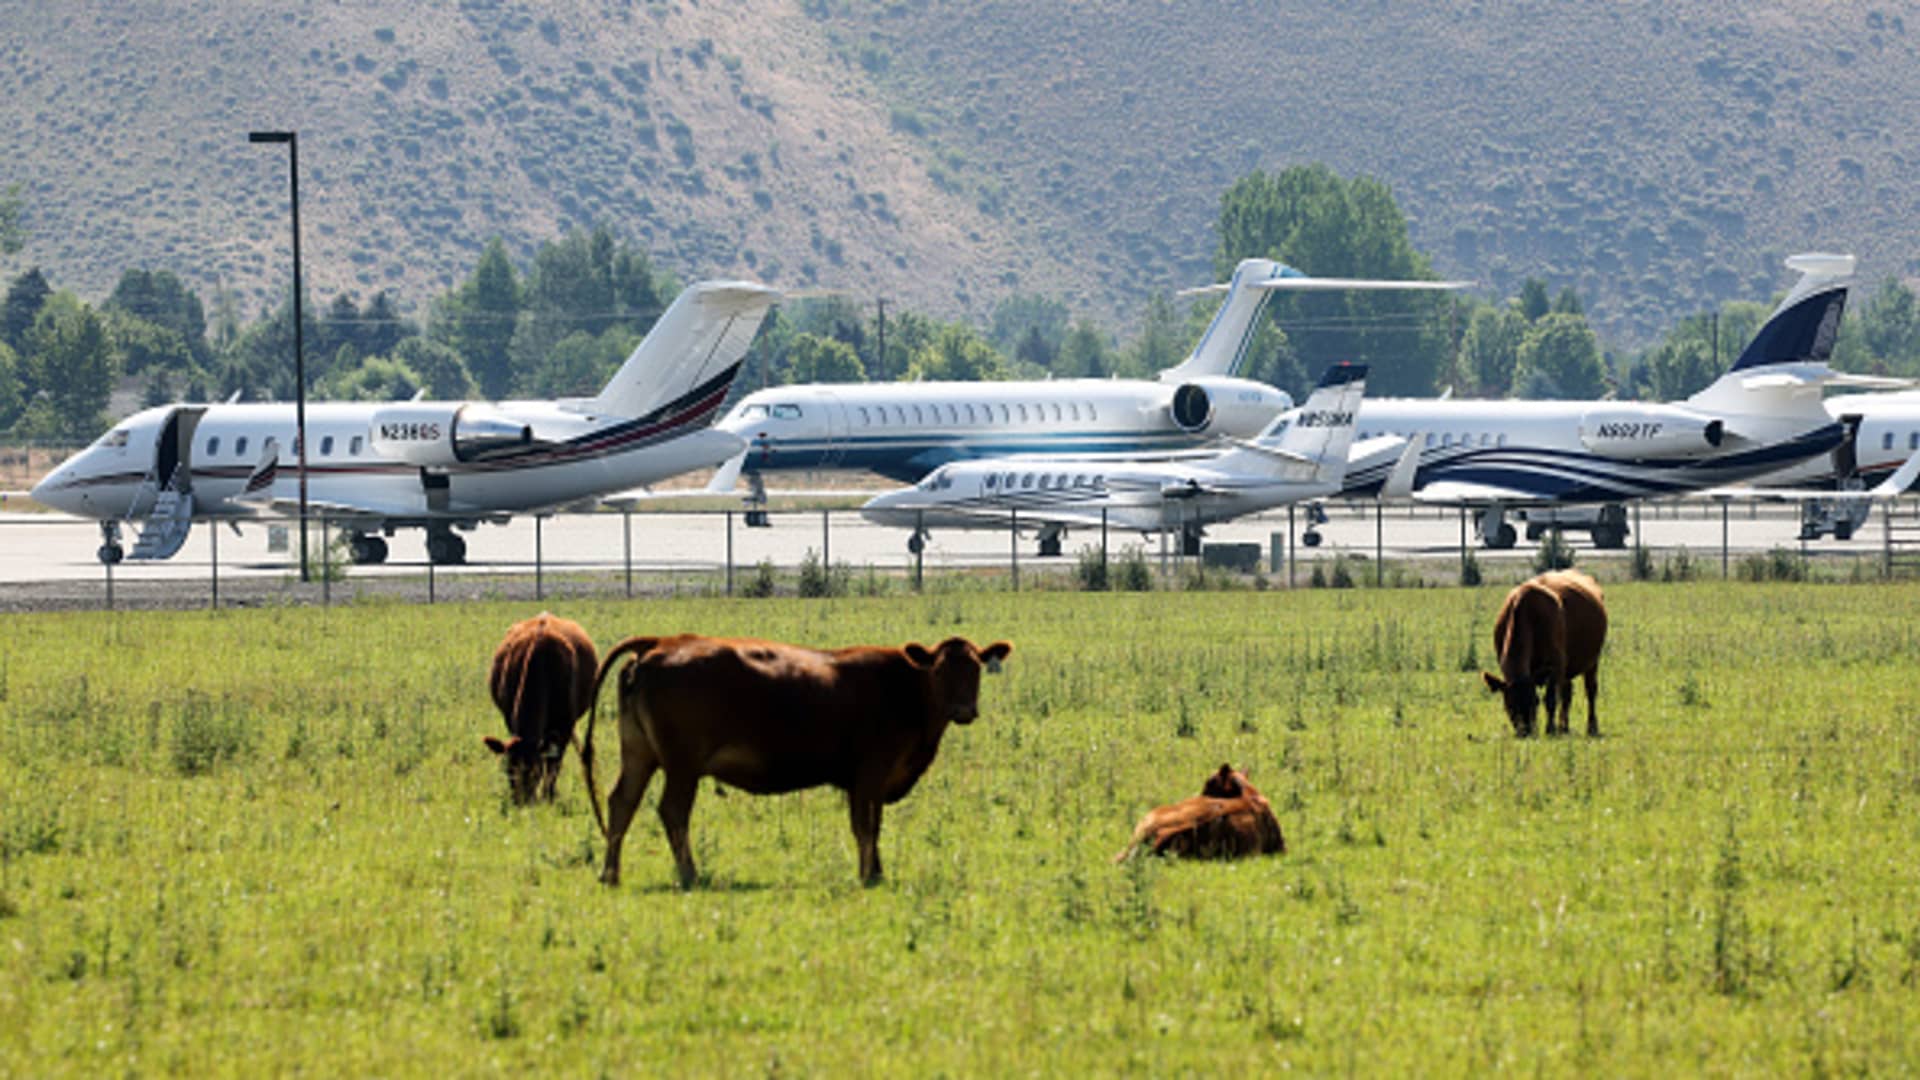 Private Jets park alongside grazing cows at Friedman Memorial Airport ahead of the Allen & Company Sun Valley Conference, July 5, 2021 in Sun Valley, Idaho.